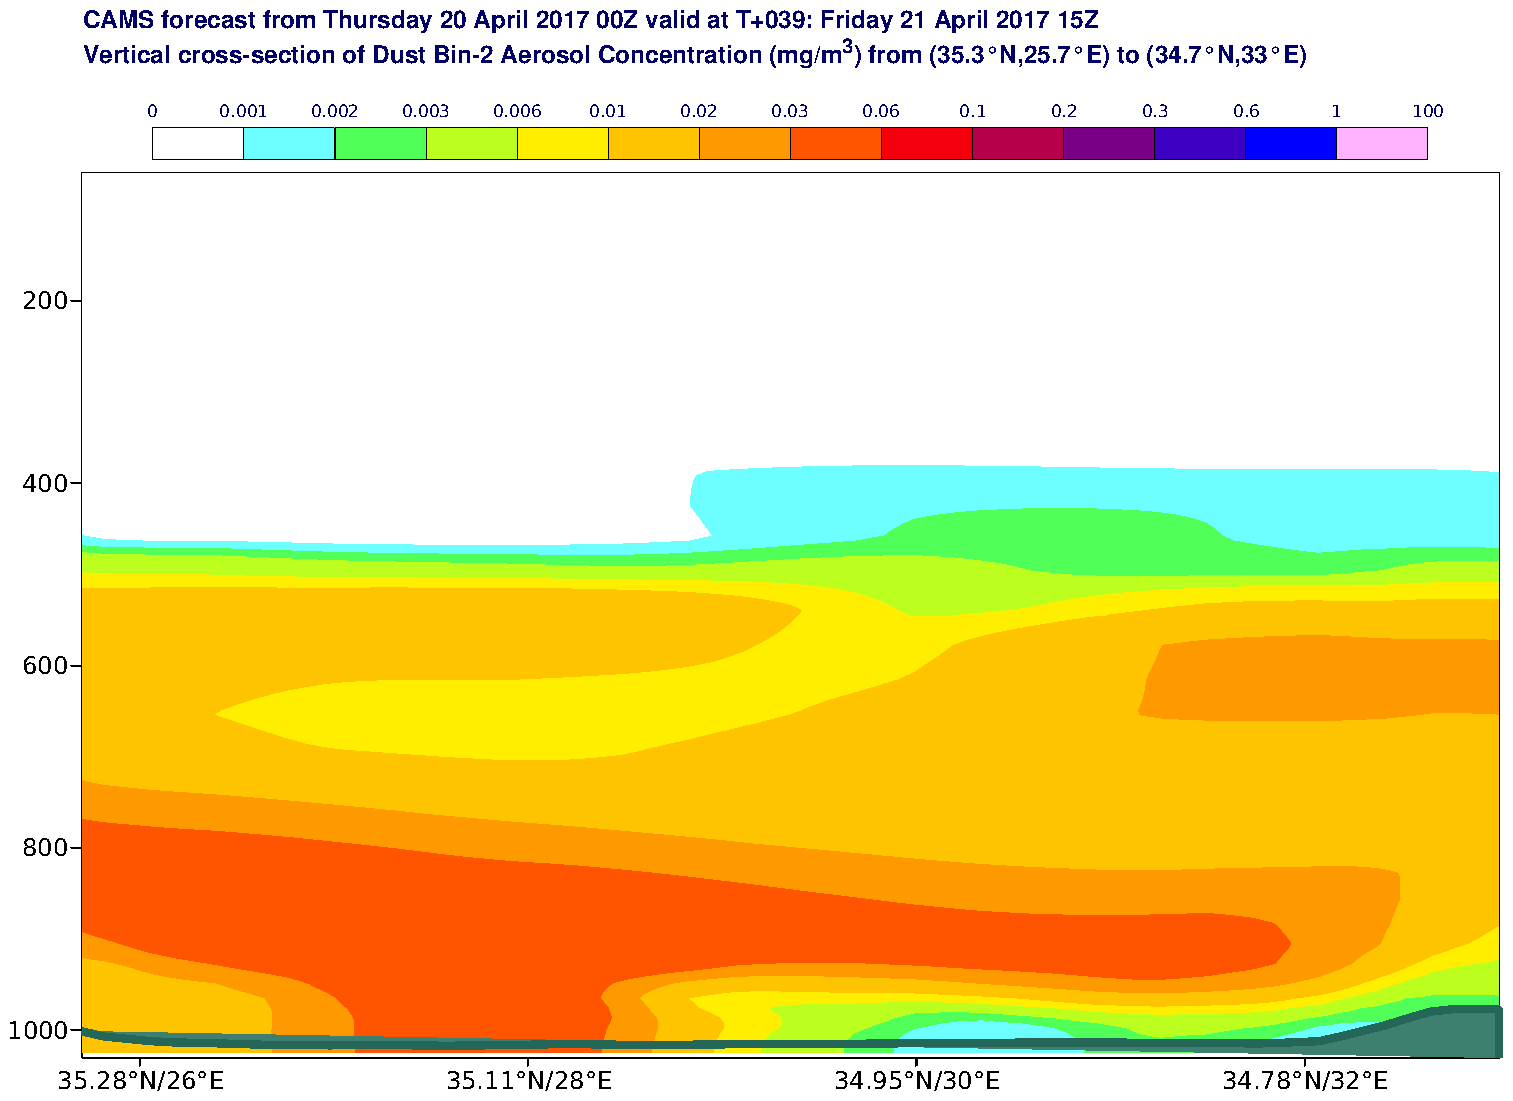 Vertical cross-section of Dust Bin-2 Aerosol Concentration (mg/m3) valid at T39 - 2017-04-21 15:00